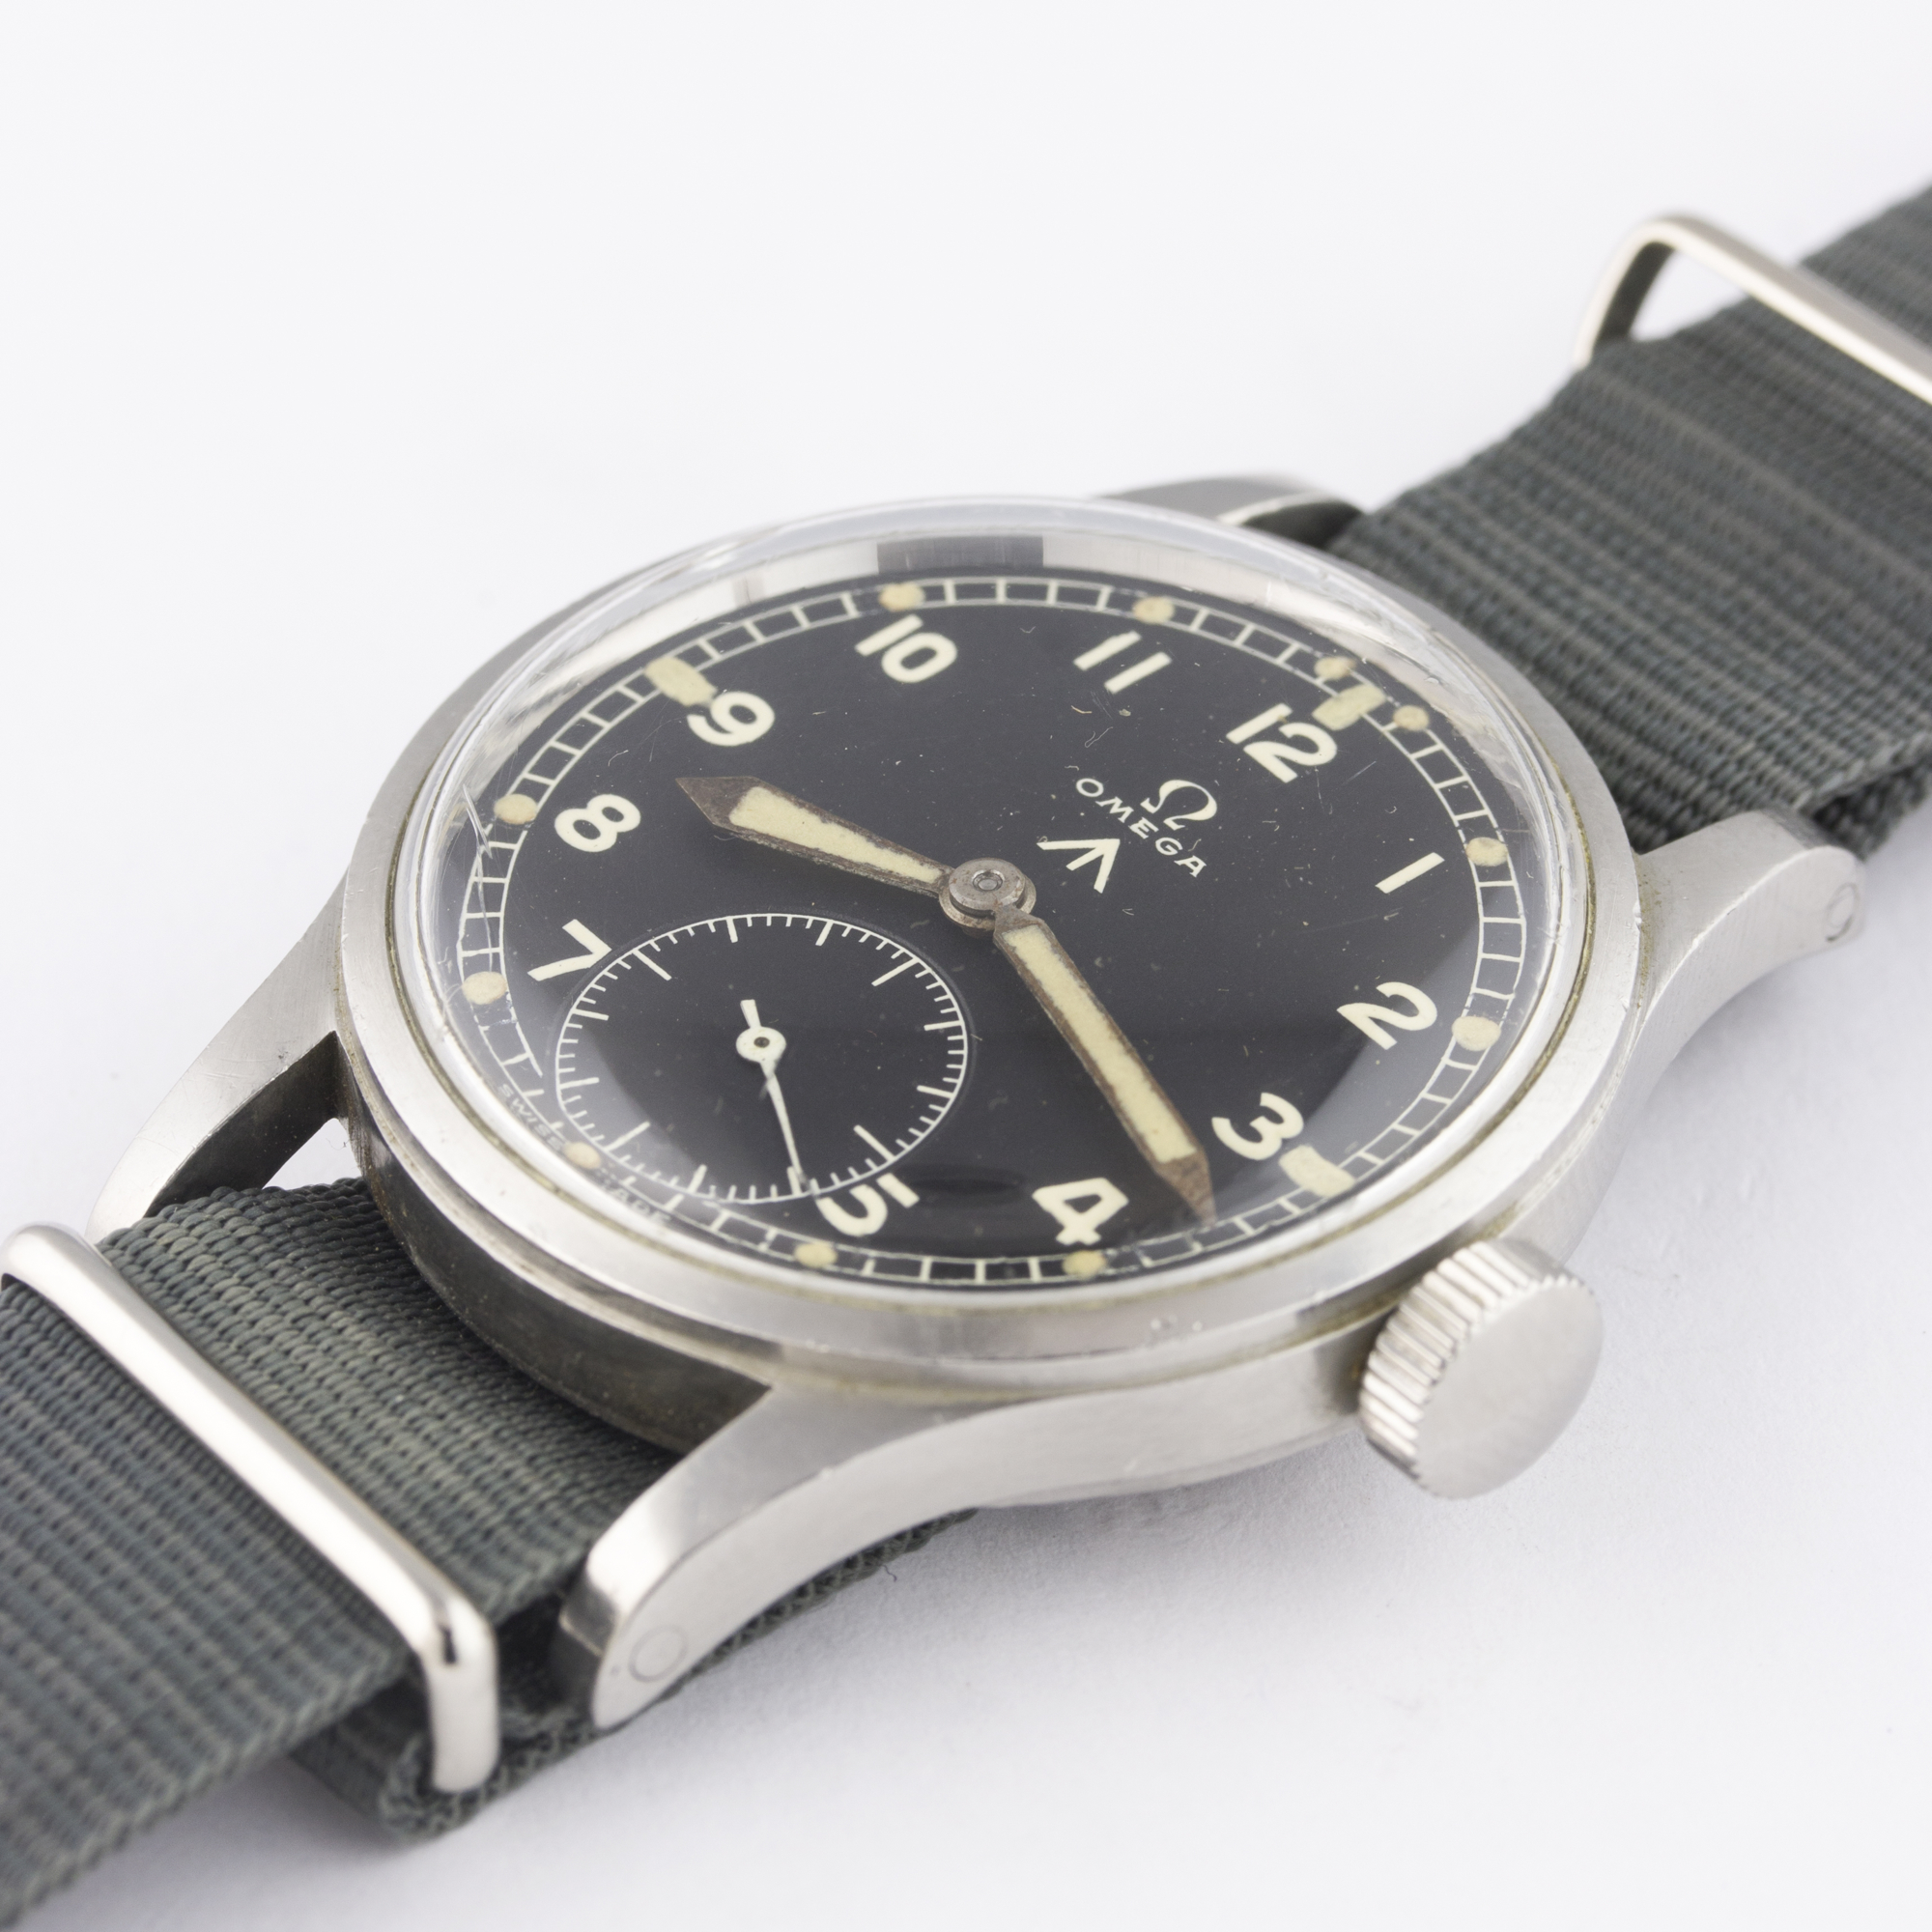 A GENTLEMAN'S STAINLESS STEEL BRITISH MILITARY OMEGA W.W.W. WRIST WATCH CIRCA 1947, PART OF THE " - Image 3 of 8